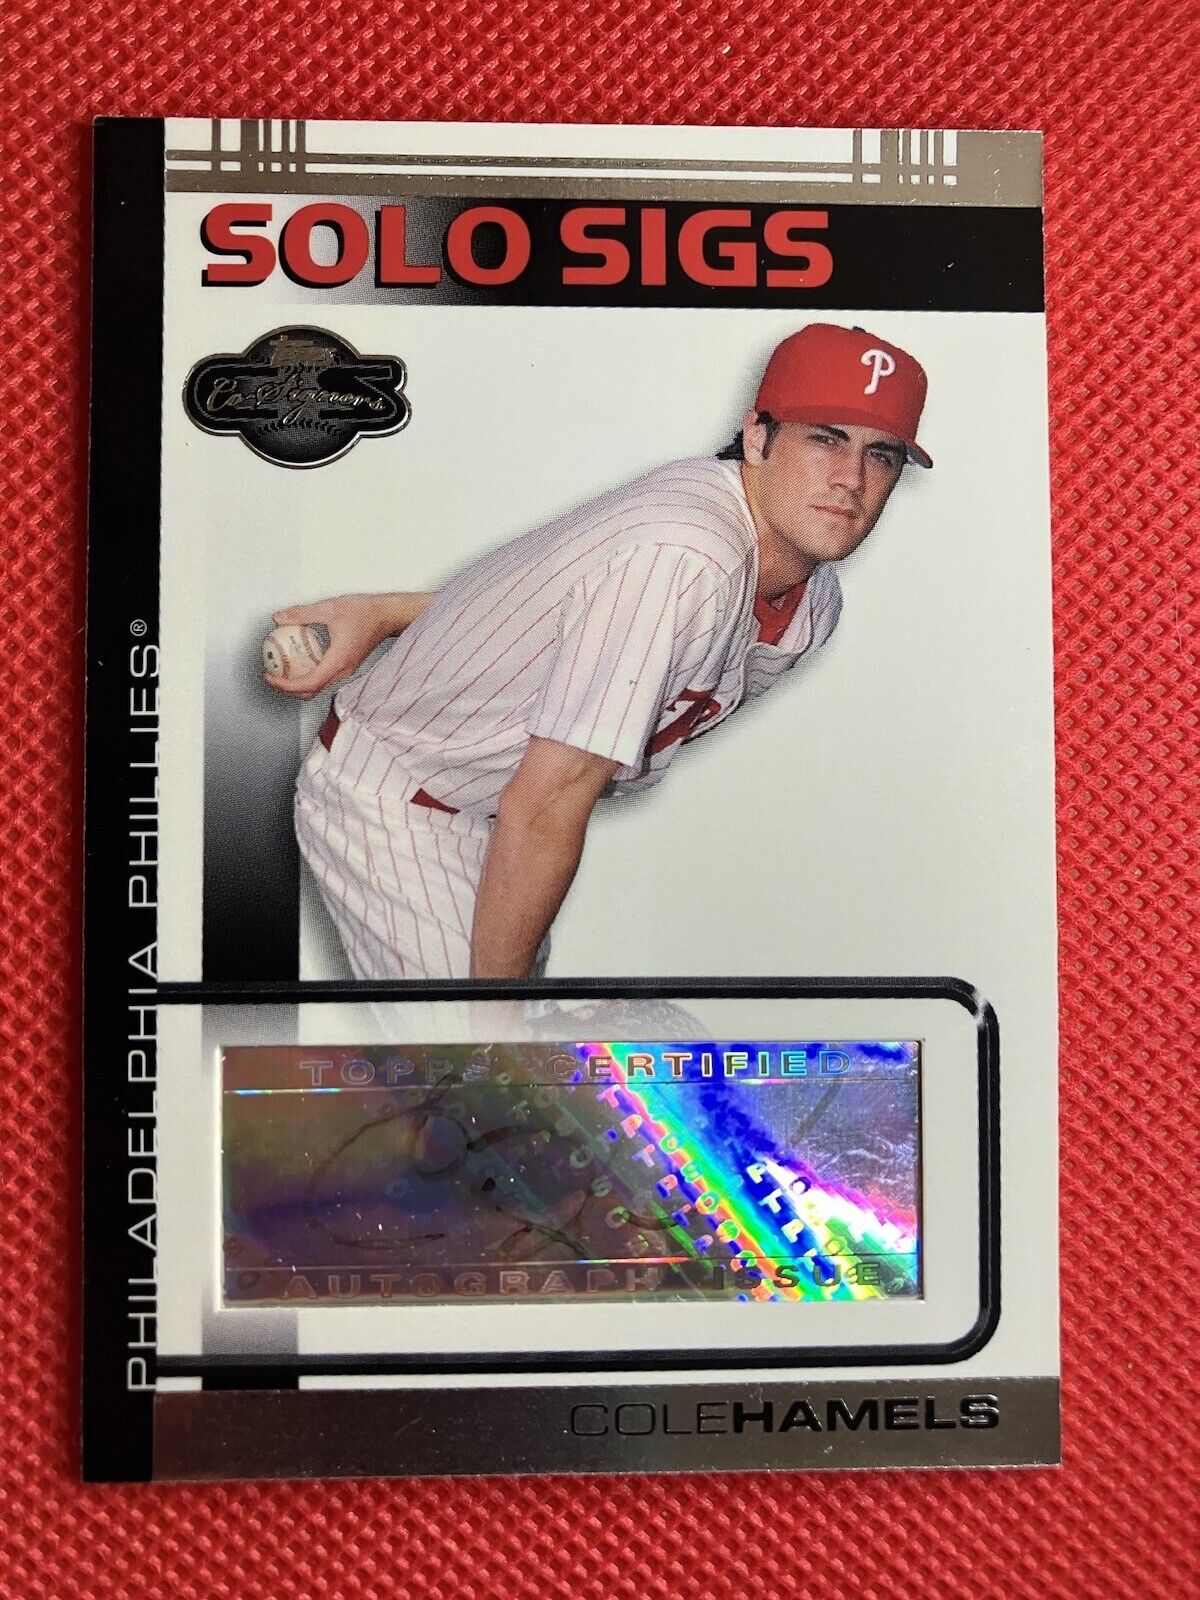 2007 Topps Solo Sigs Cole Hamels RC Auto Rookie Phillies Baseball Card